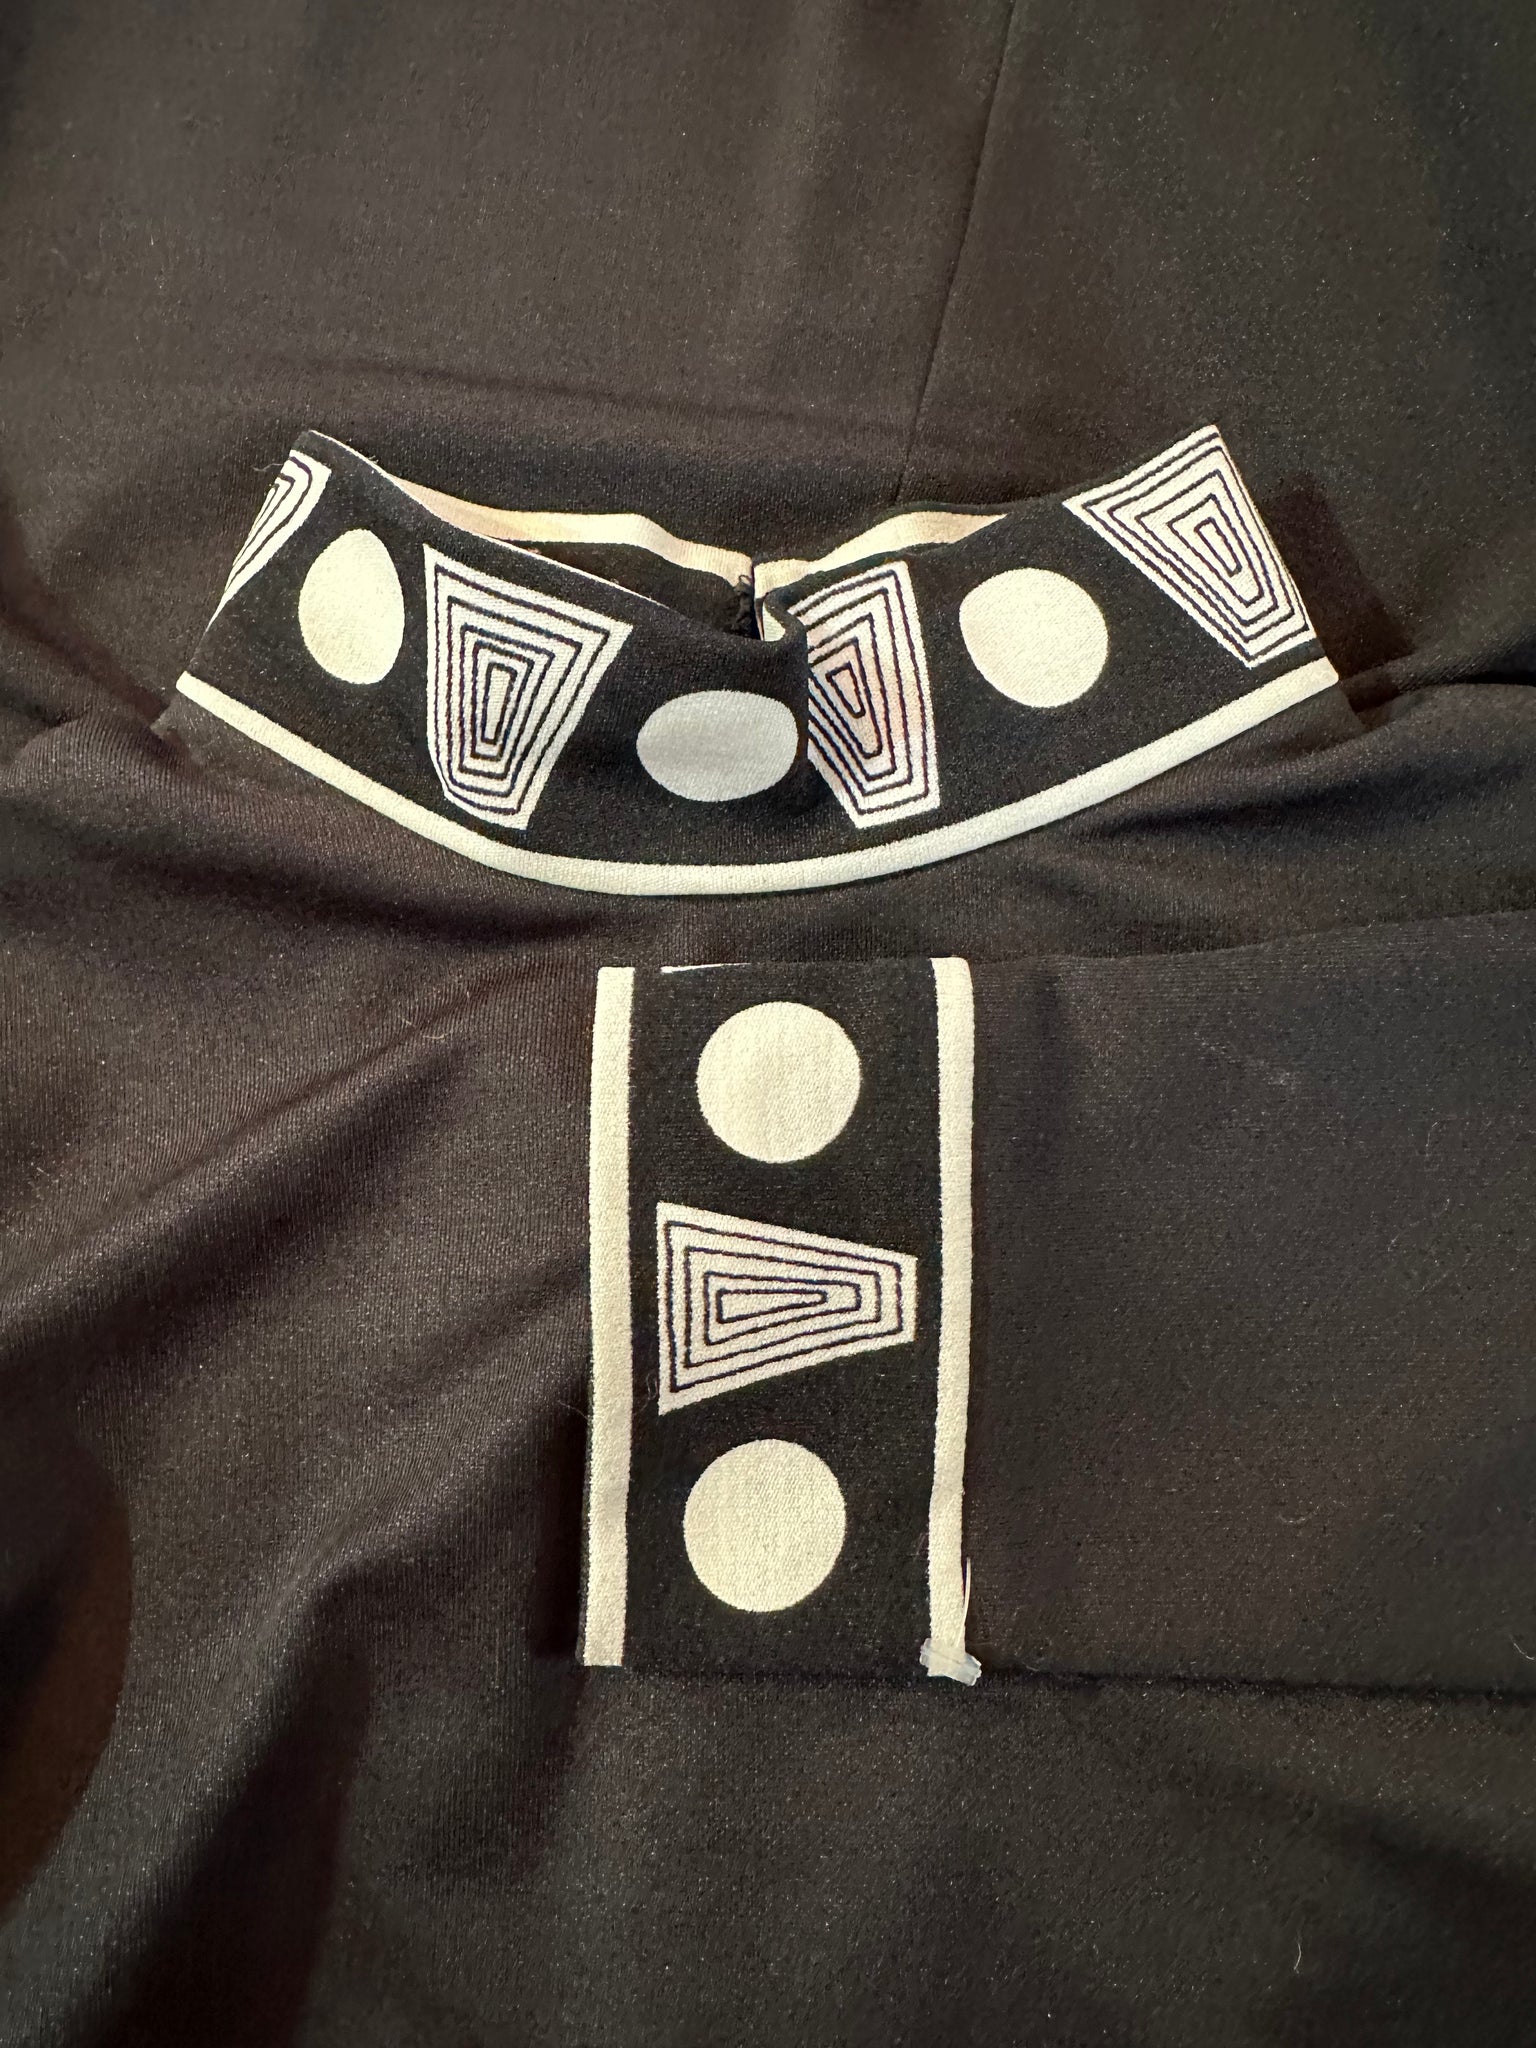  Paganne by Gene Berk 70s Black and White Polyester Op Art Maxi Dress COLLAR CUFF DETAIL 4 of 7